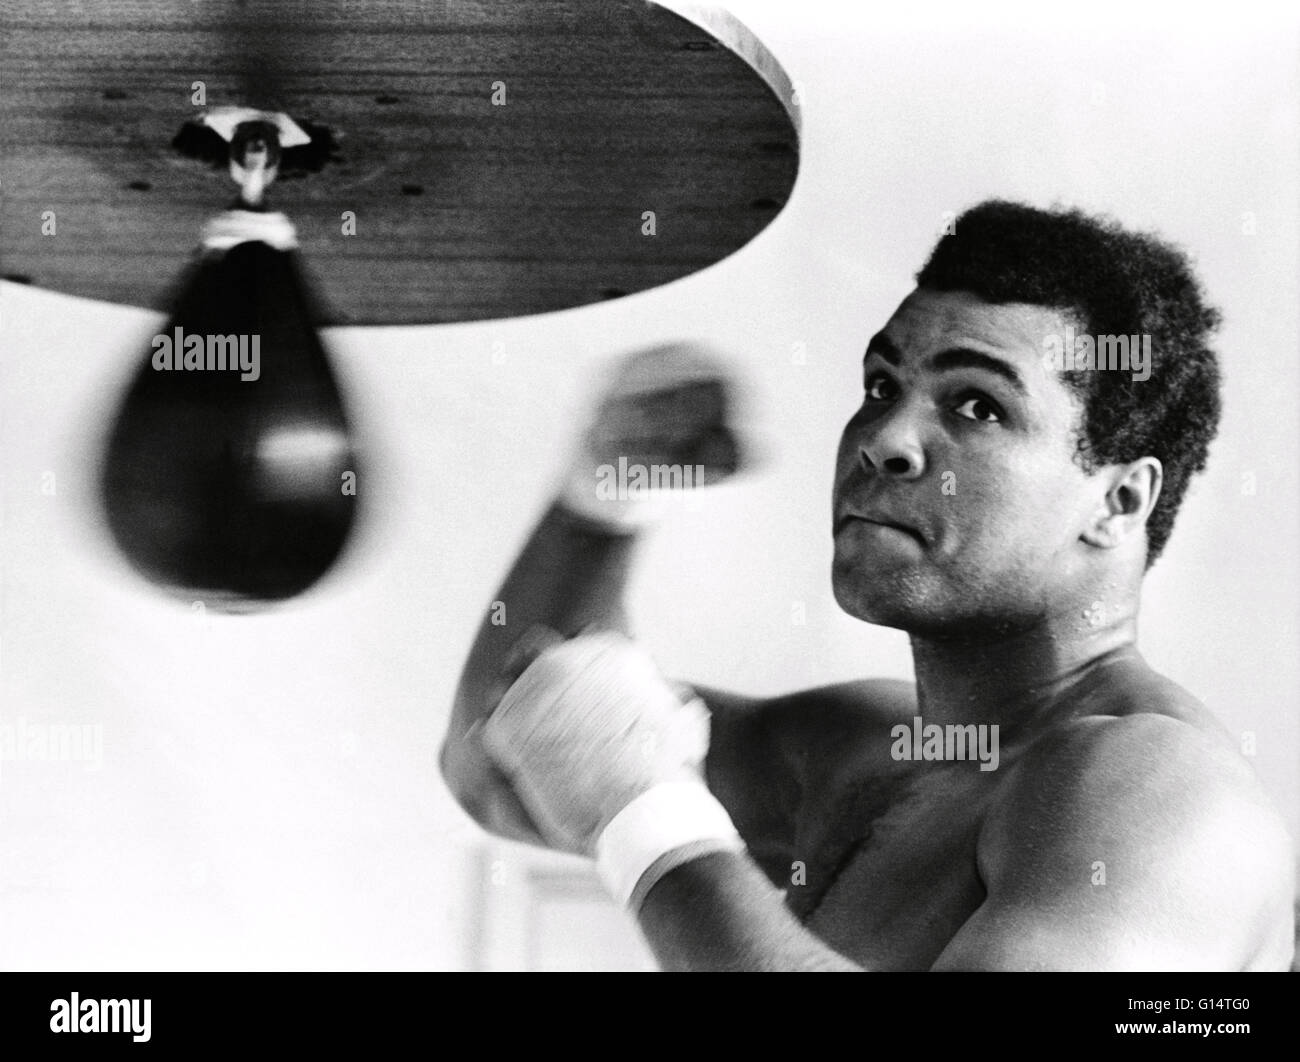 Muhammad Ali (January 17, 1942) is an American former professional boxer, philanthropist and social activist. Originally known as Cassius Clay he won six Kentucky Golden Gloves titles, two national Golden Gloves titles, an Amateur Athletic Union National Stock Photo